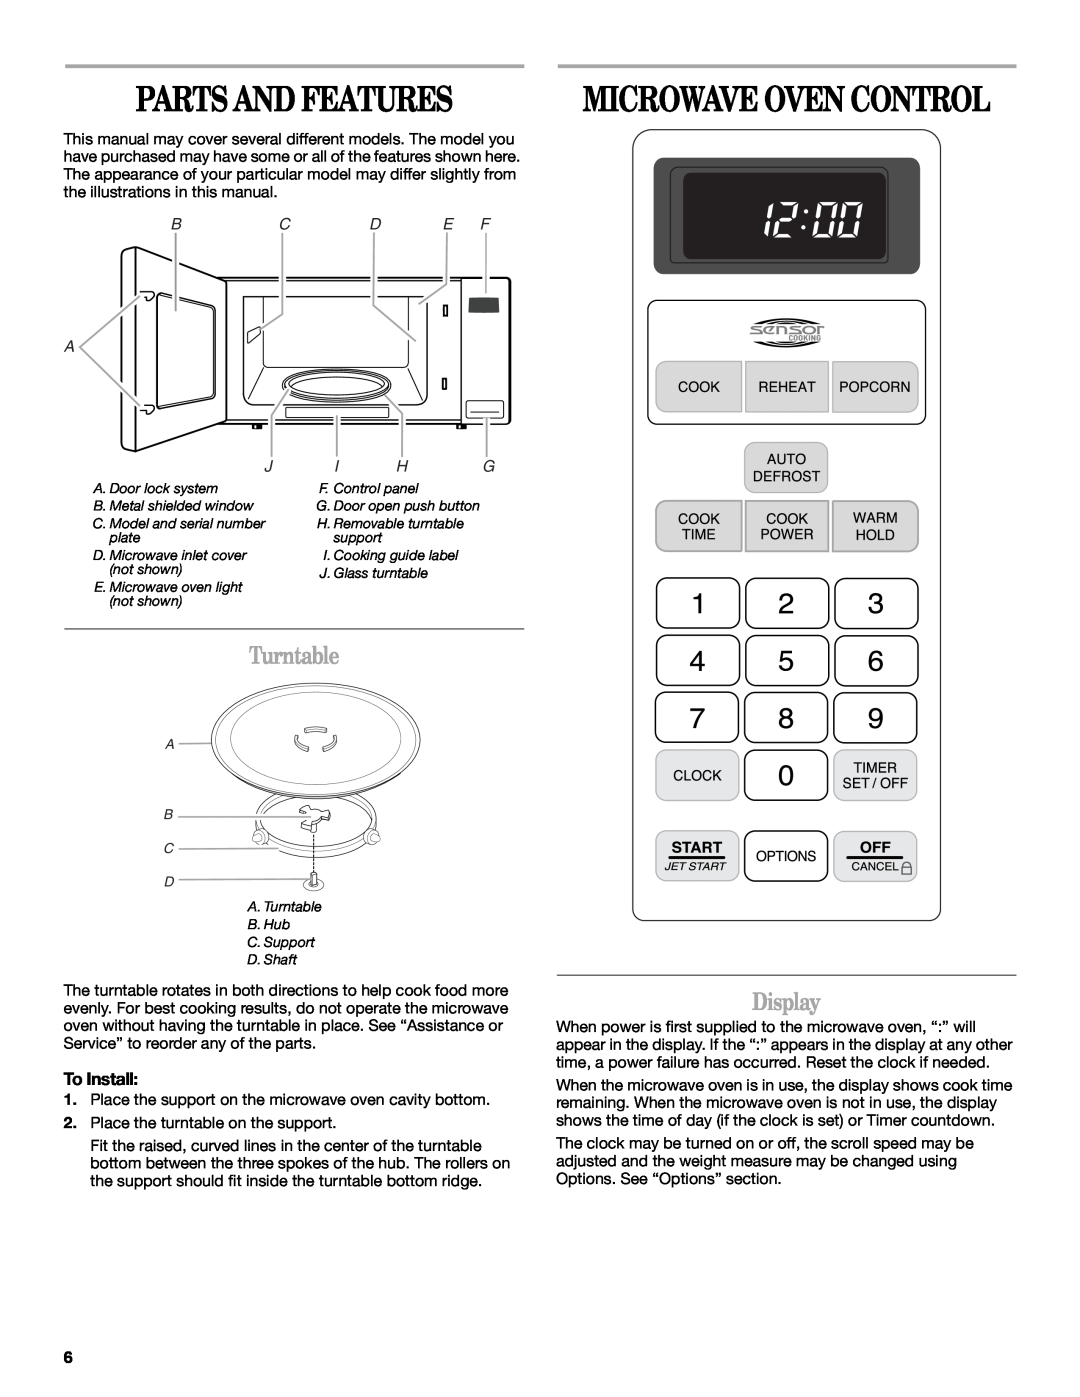 Whirlpool MT4155 manual Parts And Features, Turntable, Display, Microwave Oven Control, Bcd E F A 